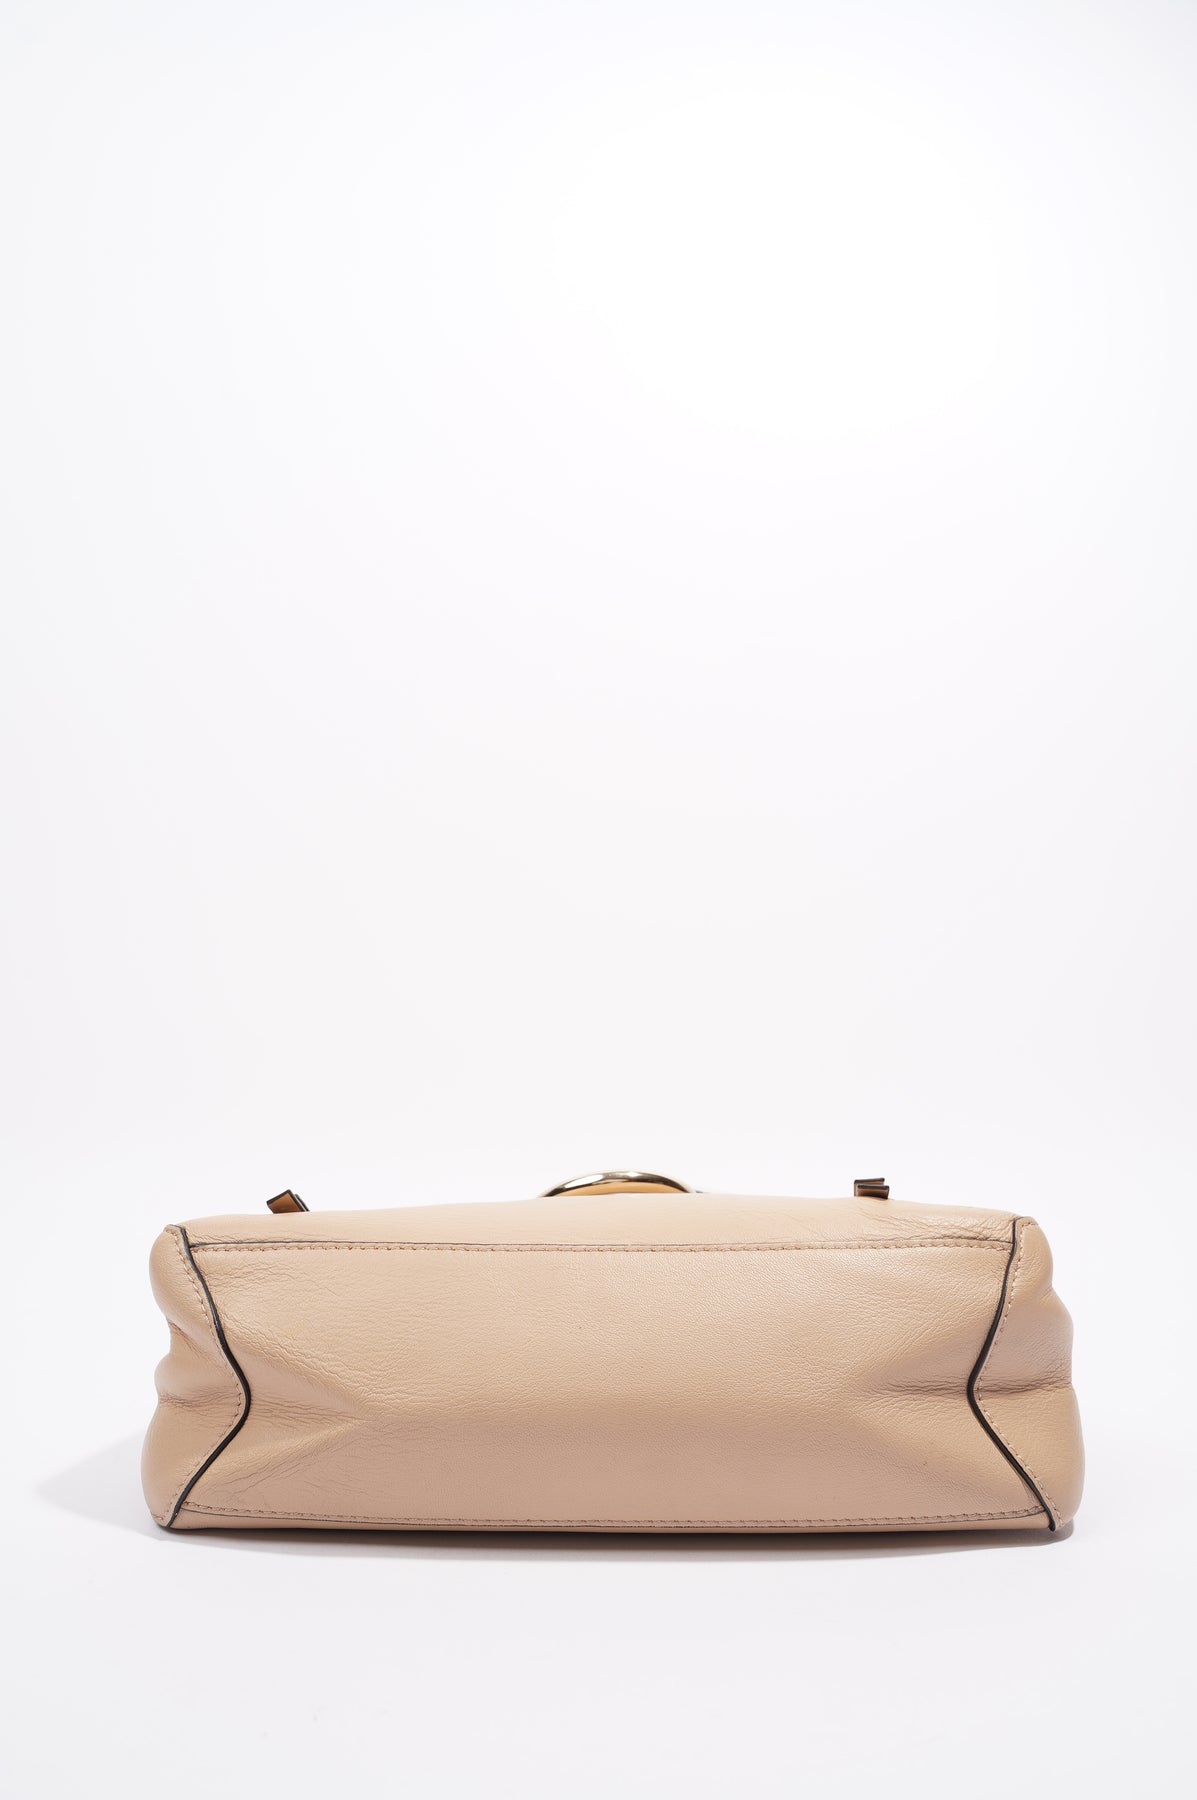 Chloe Womens Faye Day Bag Cream Leather Medium – Luxe Collective